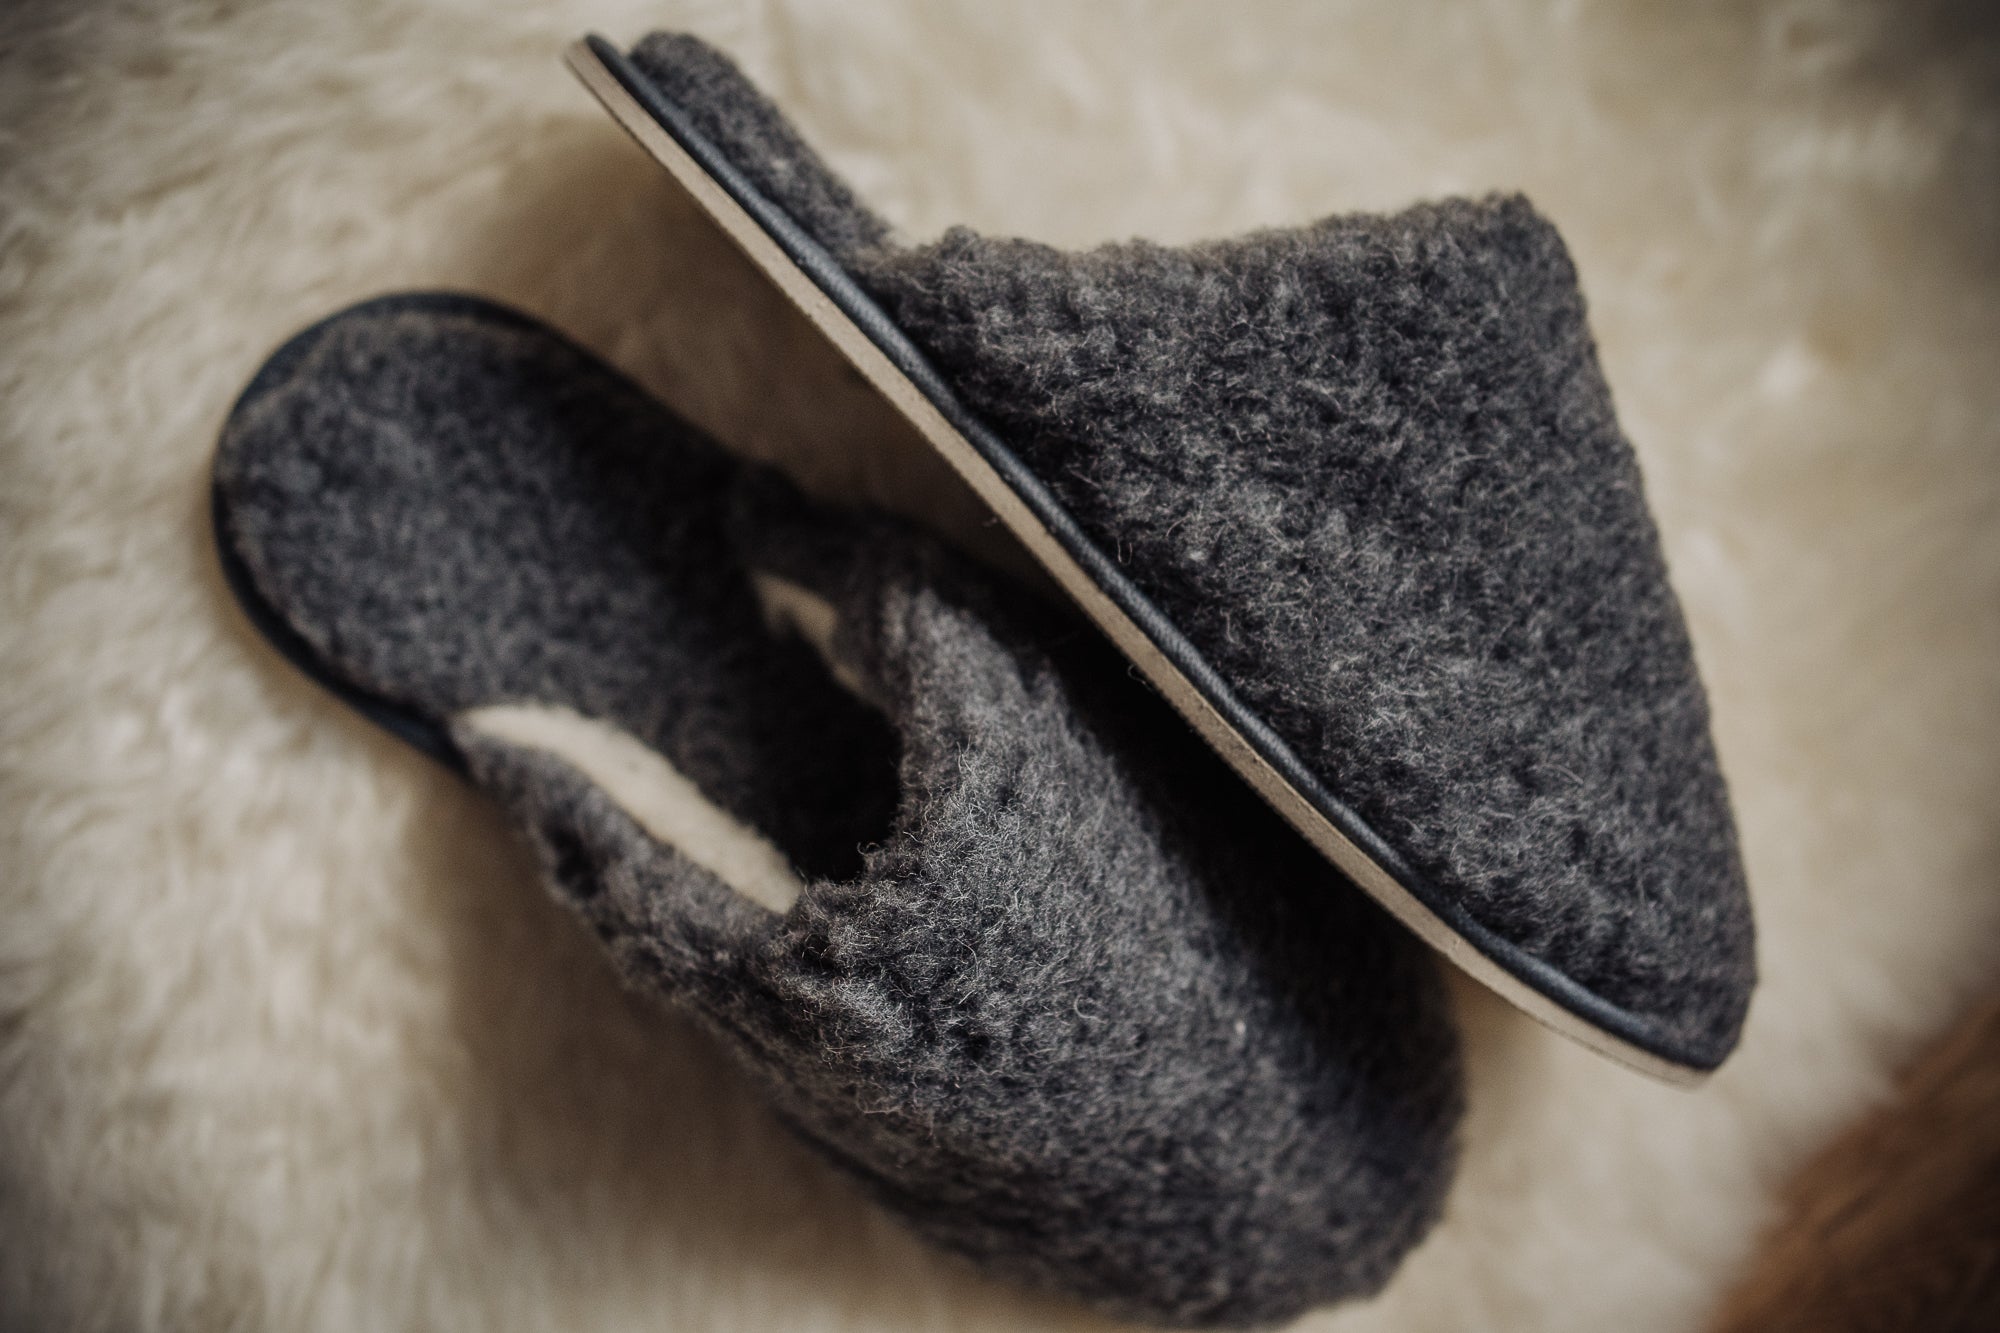 slip-on slippers, grey wool slippers, men's footwear, house shoes, lightweight slippers, natural fibre, rubber sole, comfortable house footwear, warm and cosy, gift for him, bamboshe footwear